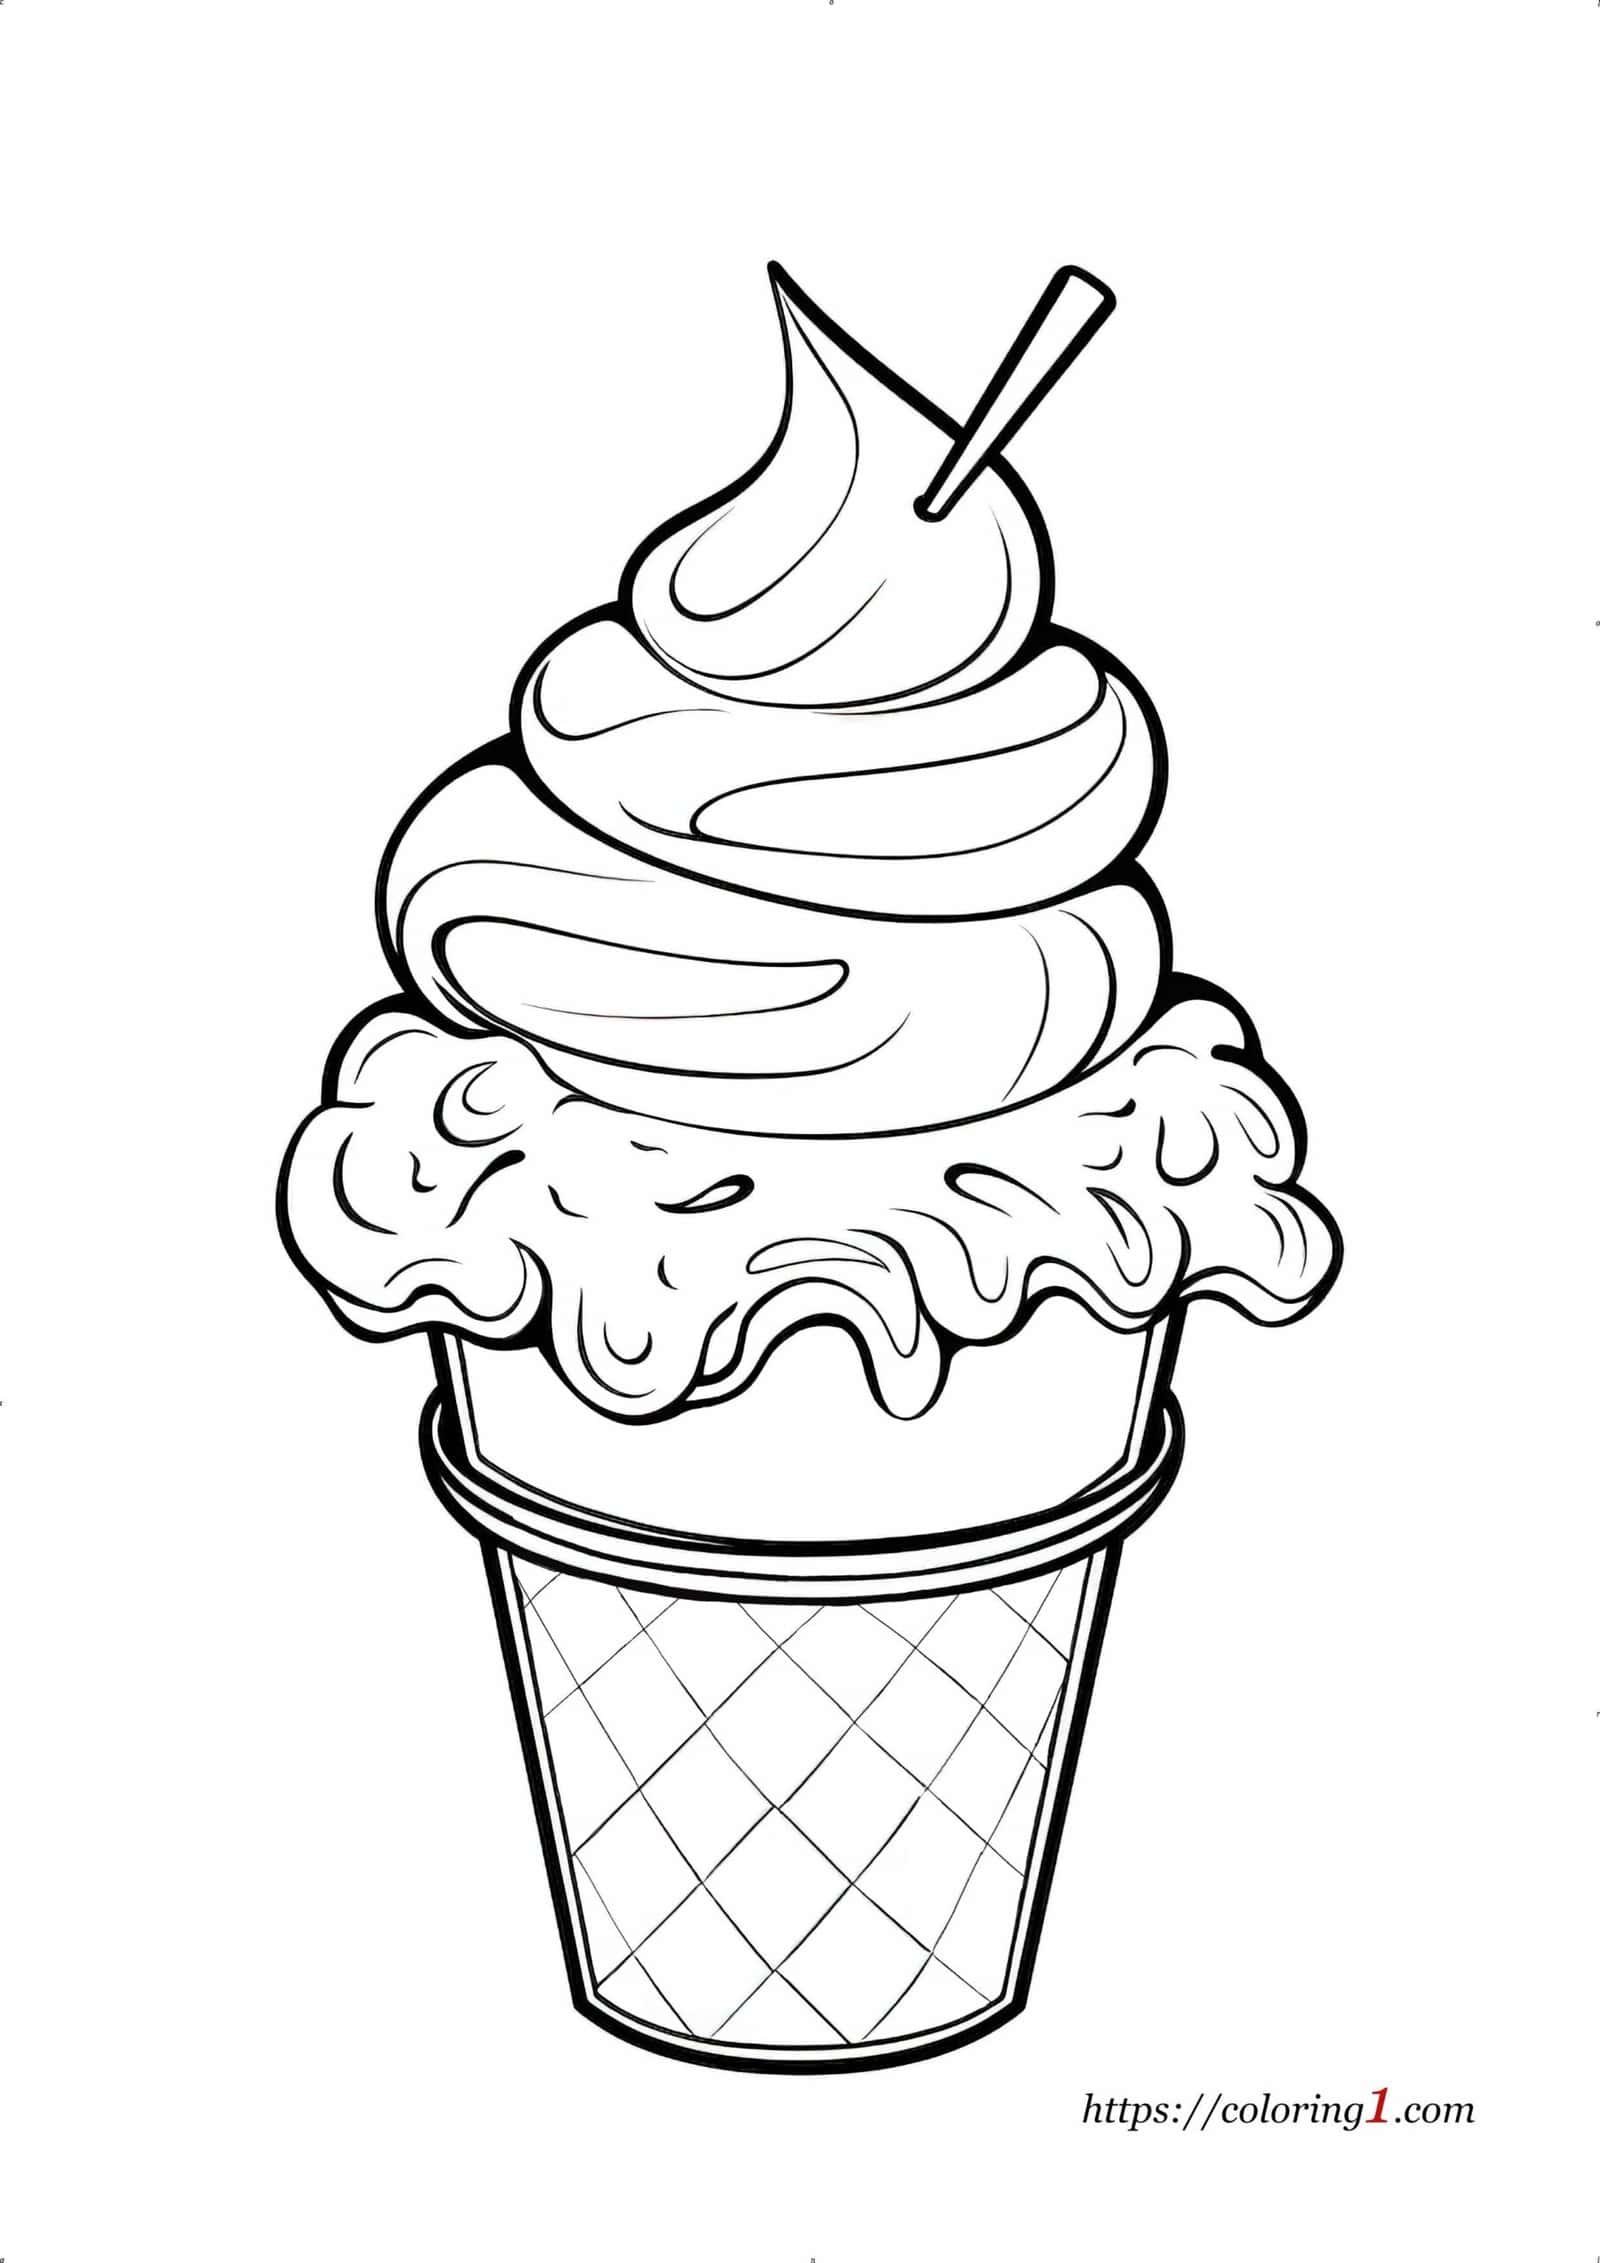 Realistic Ice Cream coloring page for kids and adults